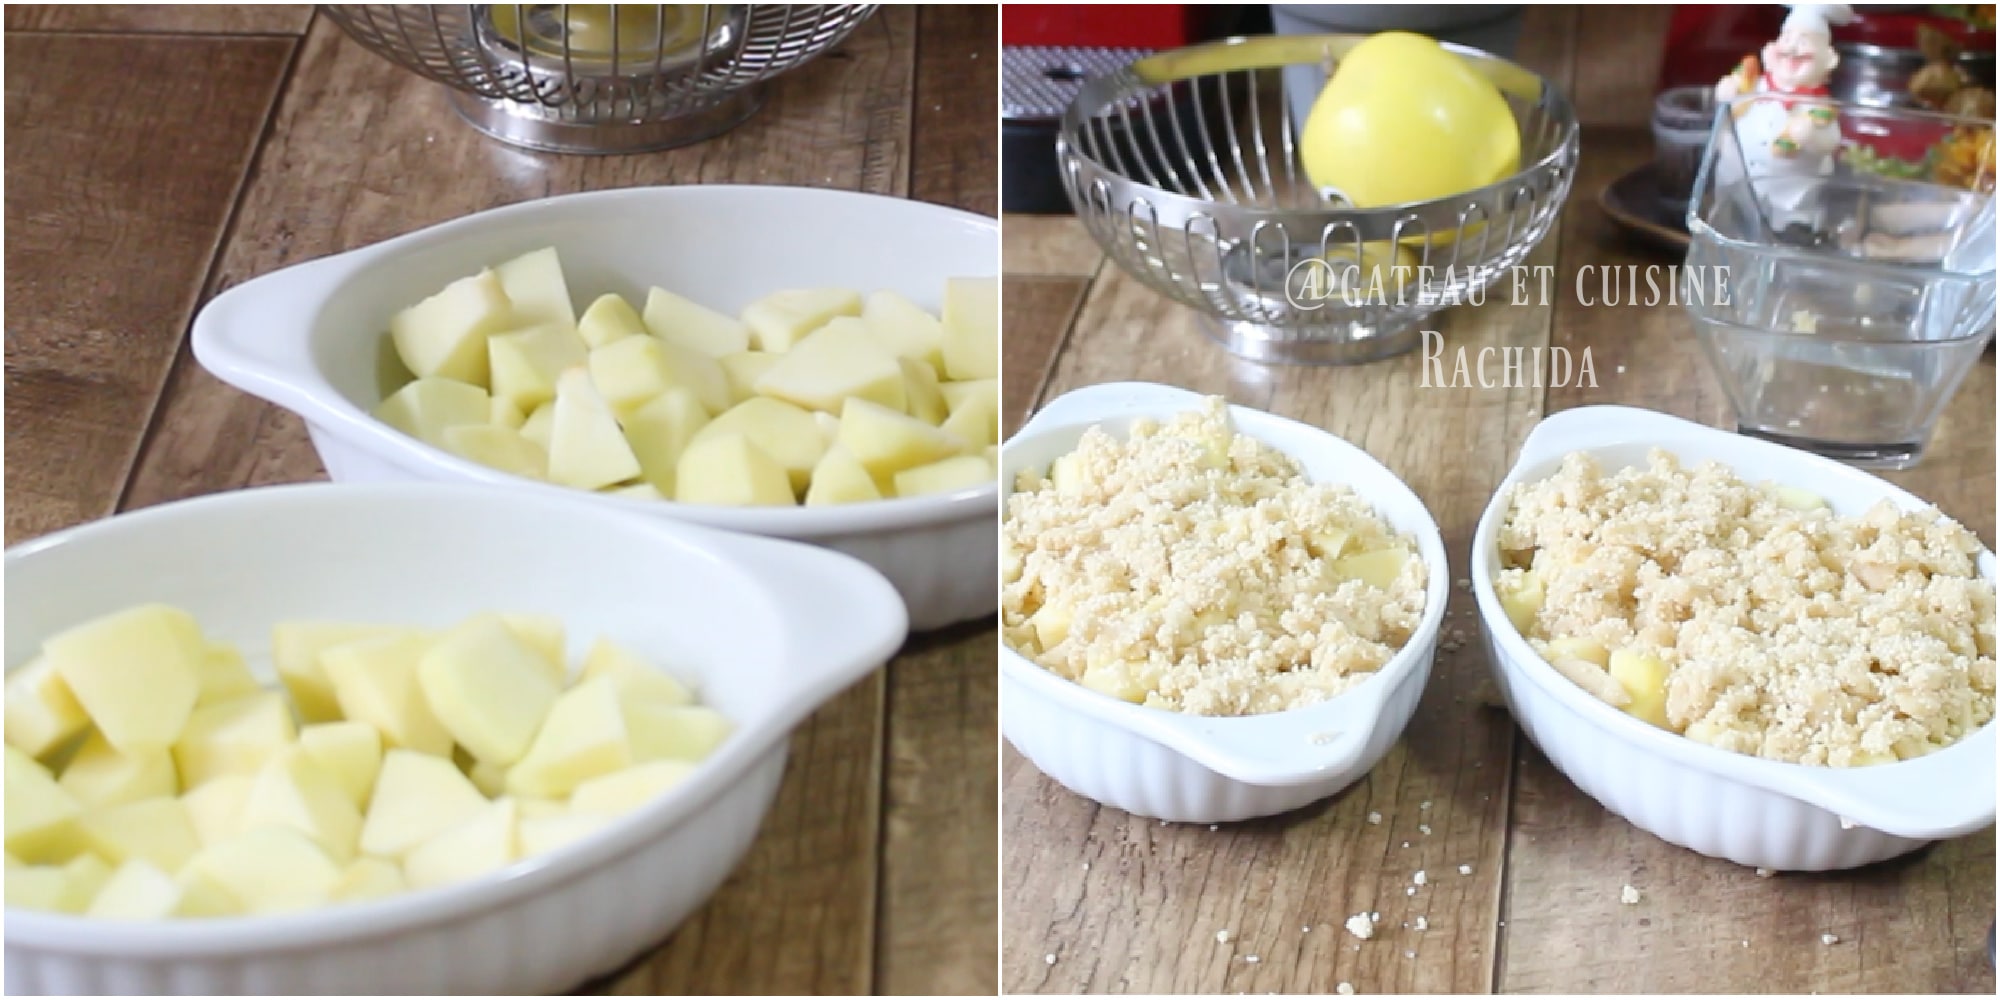 The traditional apple crumble recipe